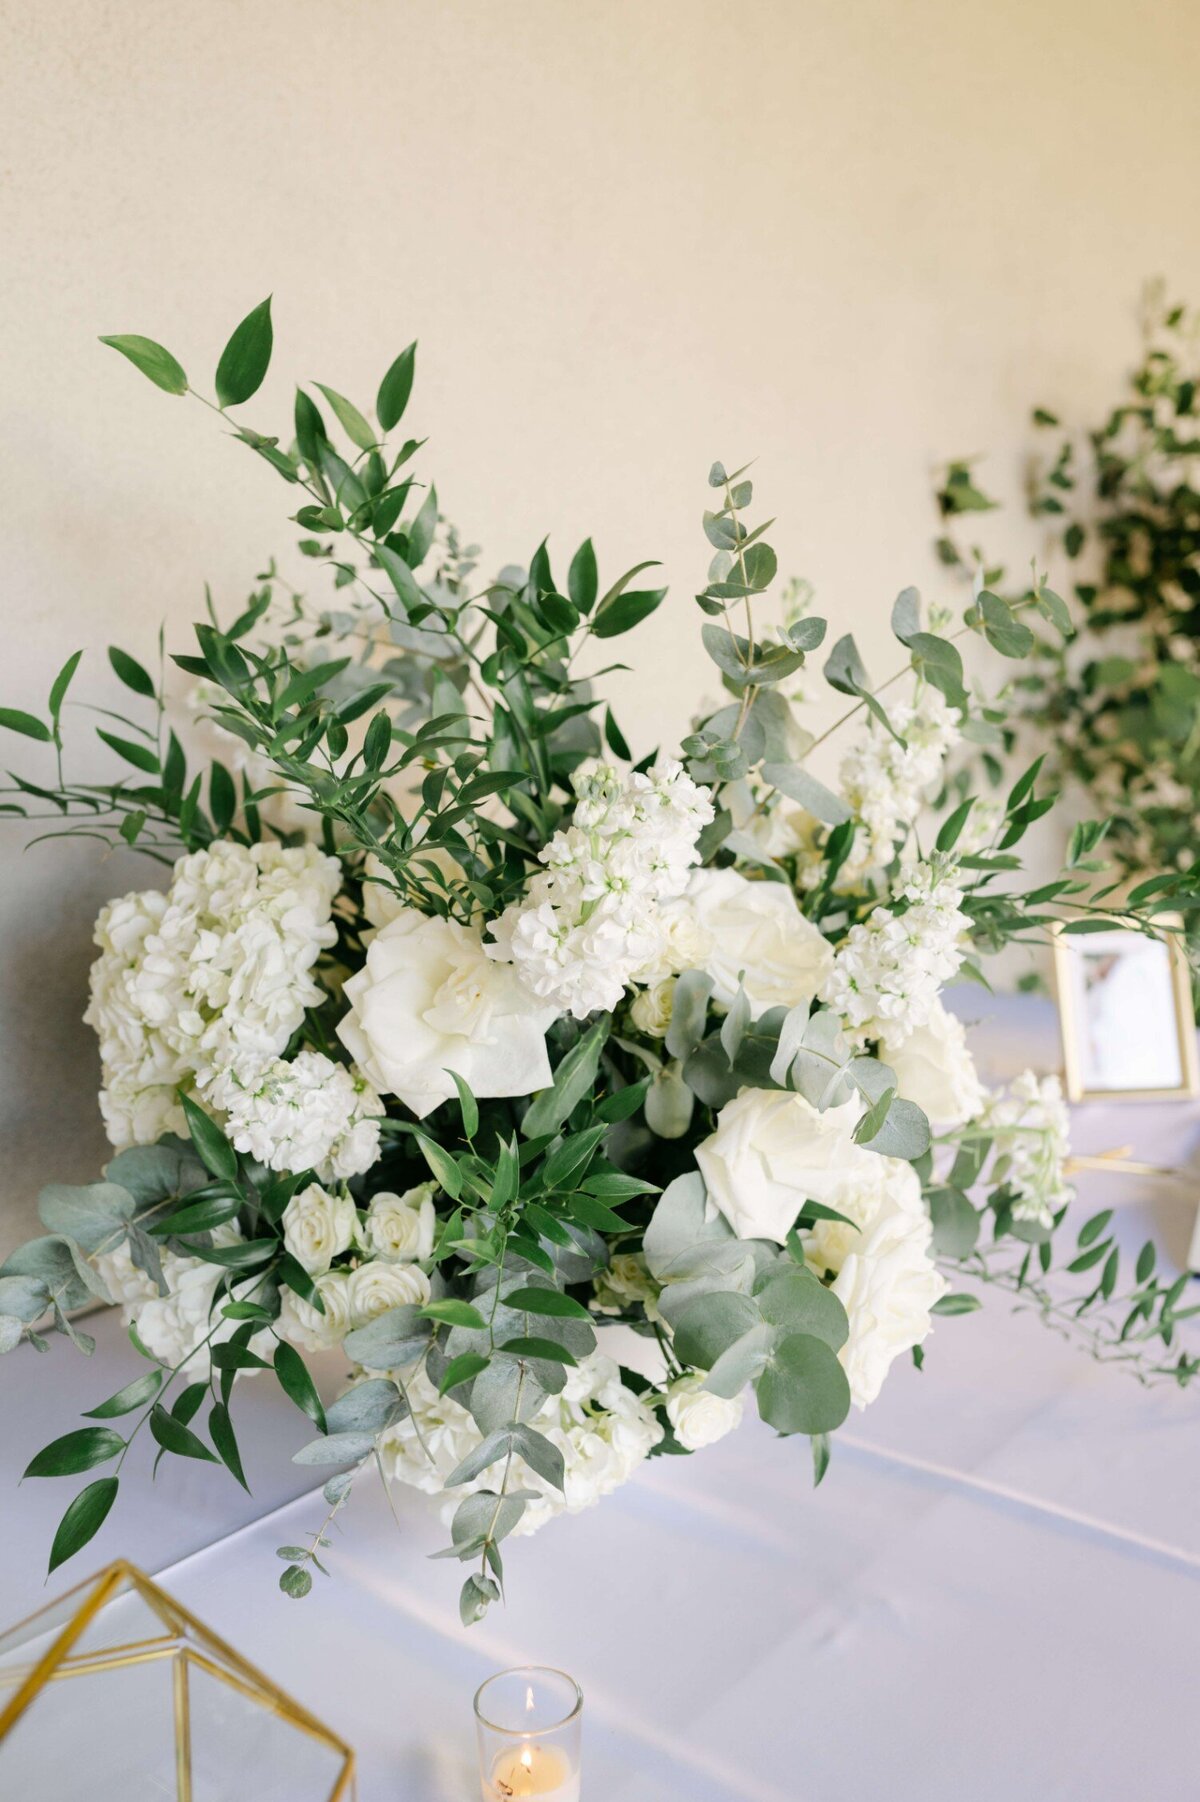 White Rose Centerpiece with Greenery